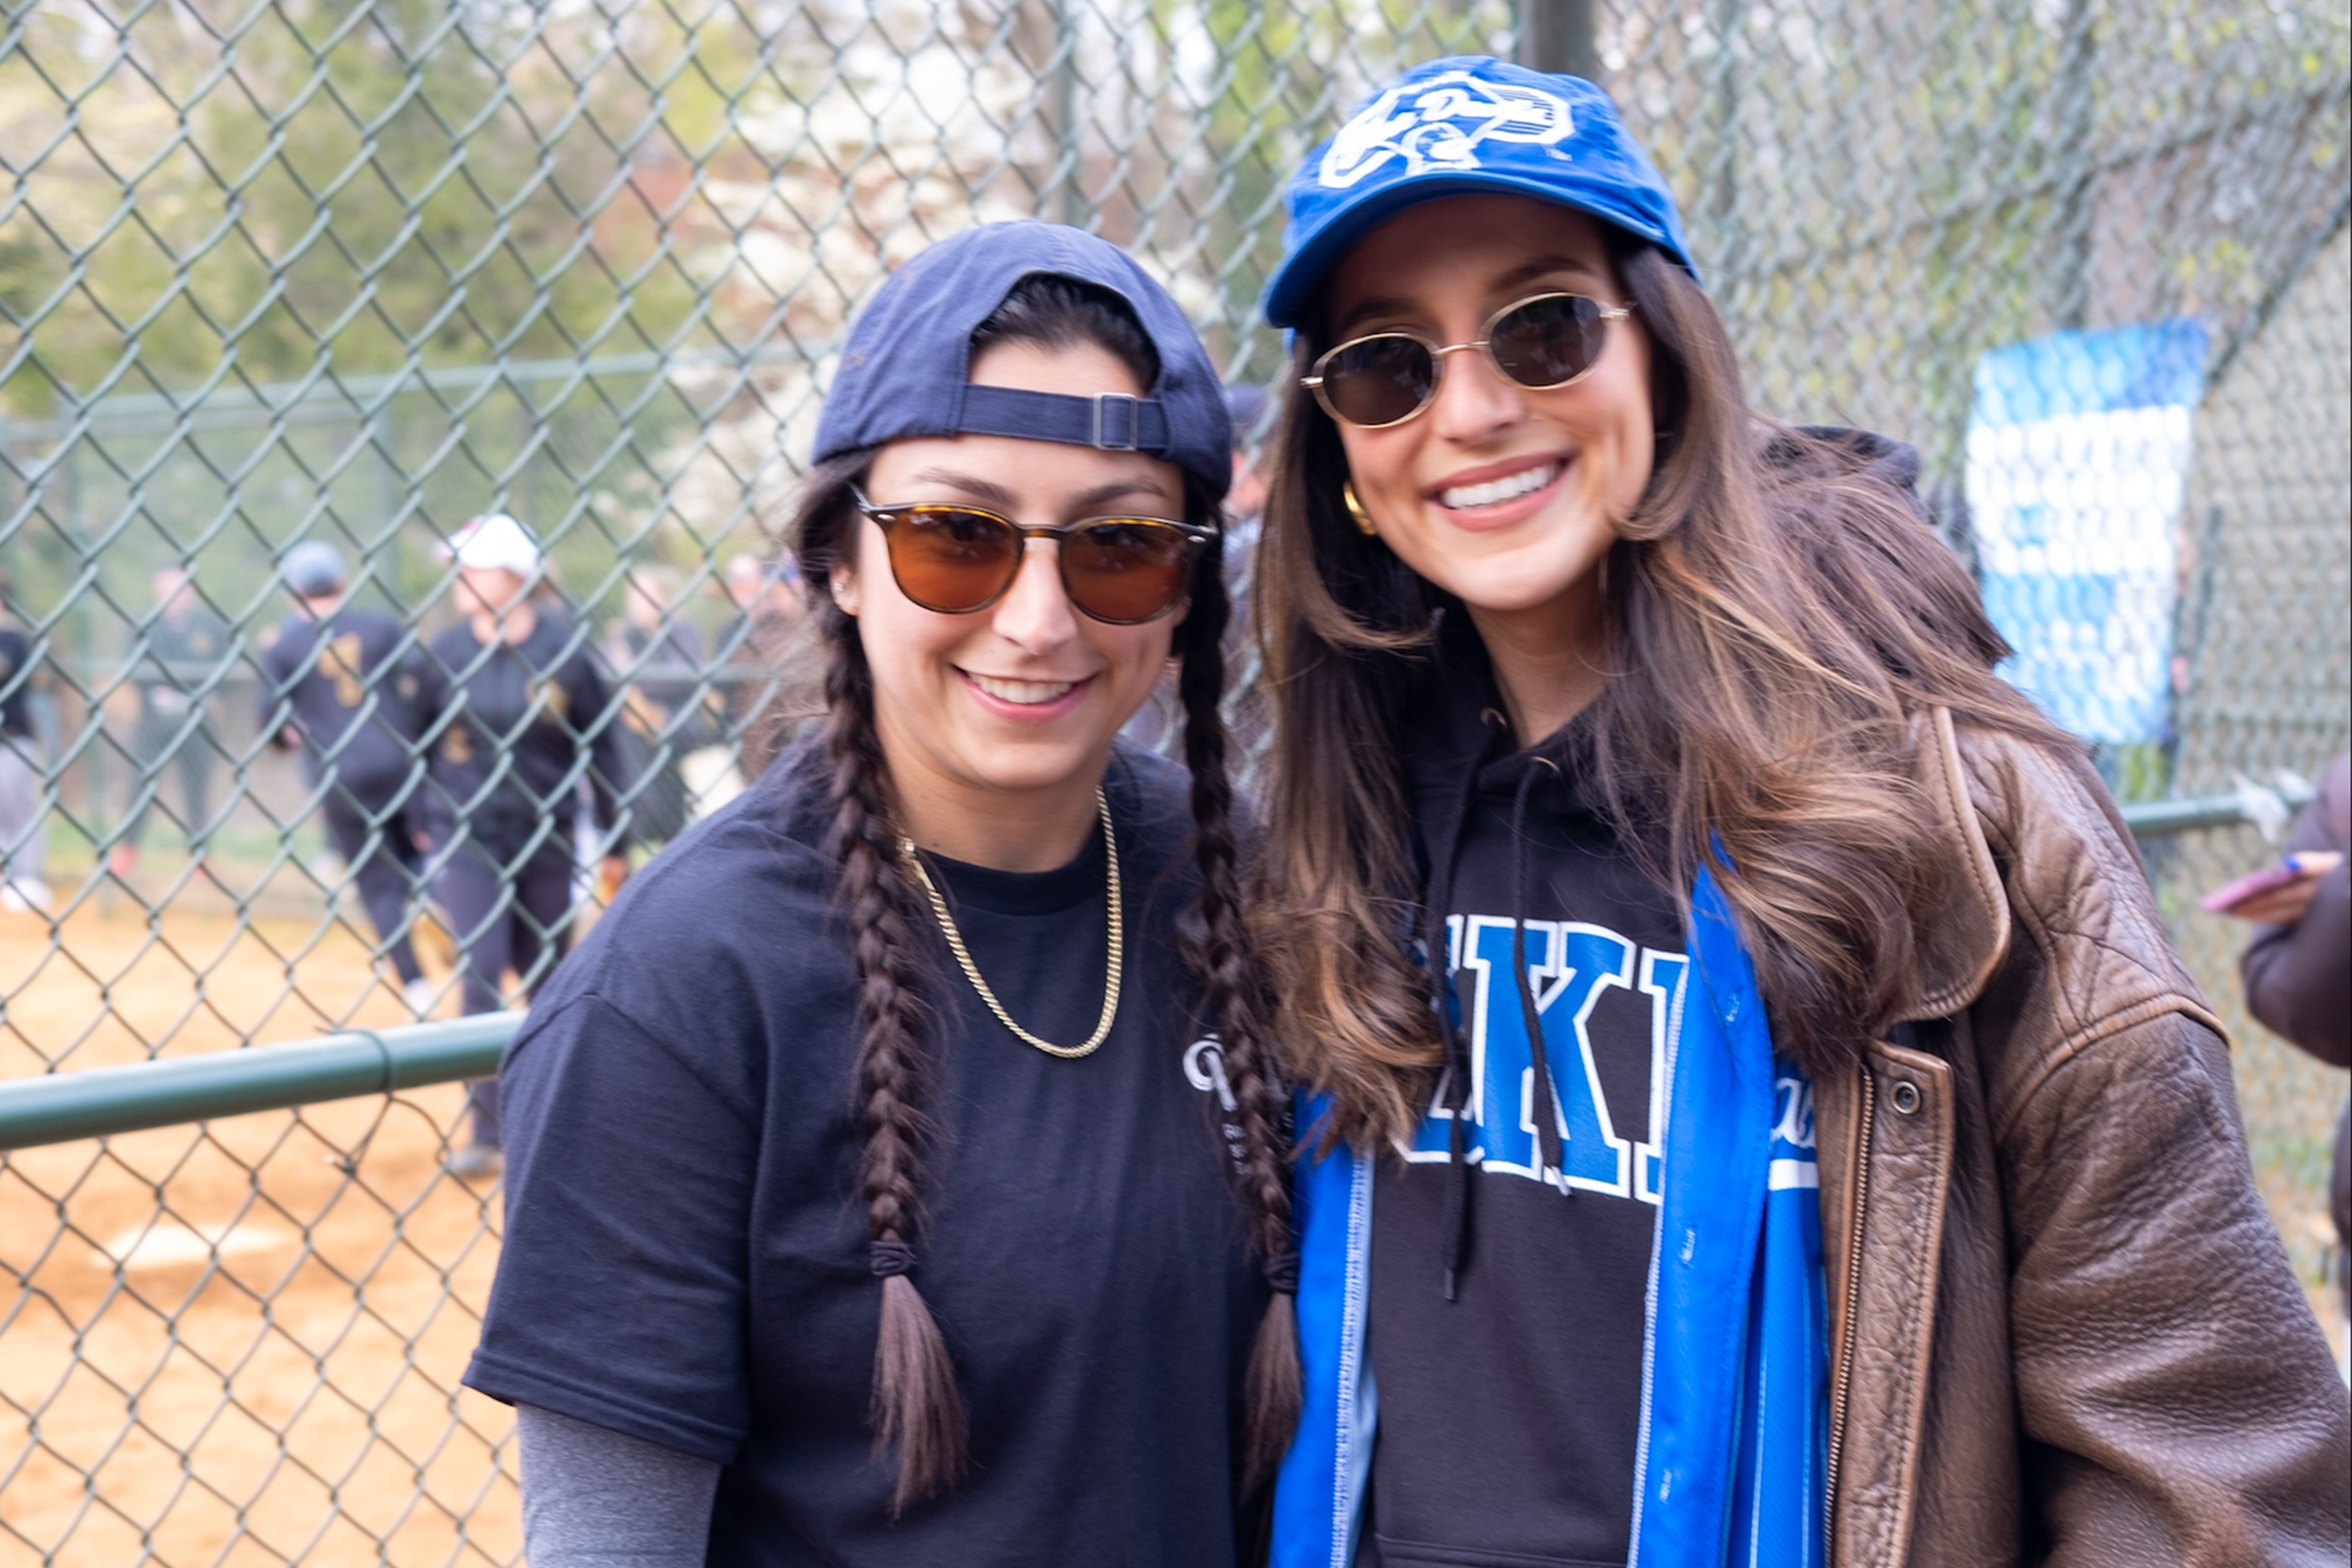 Herfi standing with fellow student at softball game